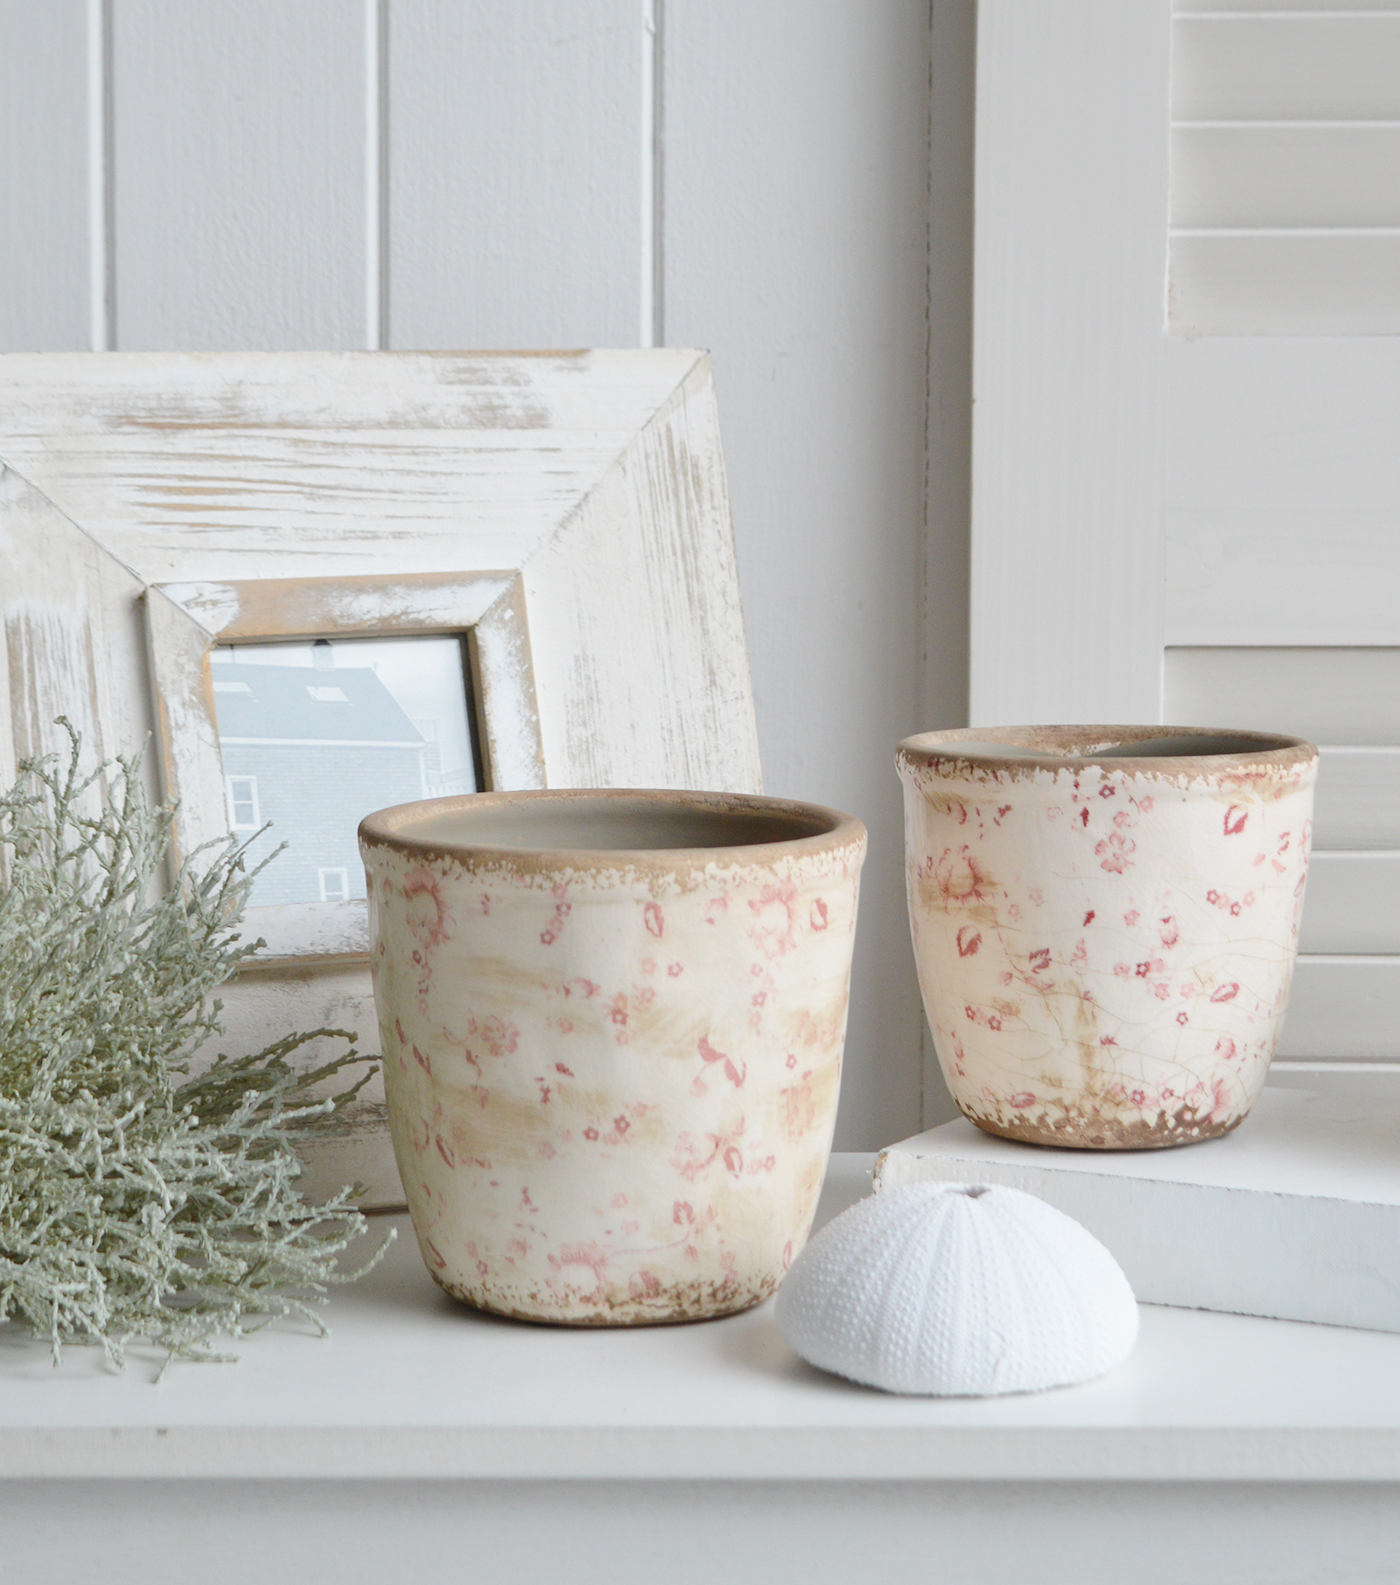 Campton pots in aged ceramic  in pinks and whites for New England, farmhouse,  Country and coastal homes and interior decor